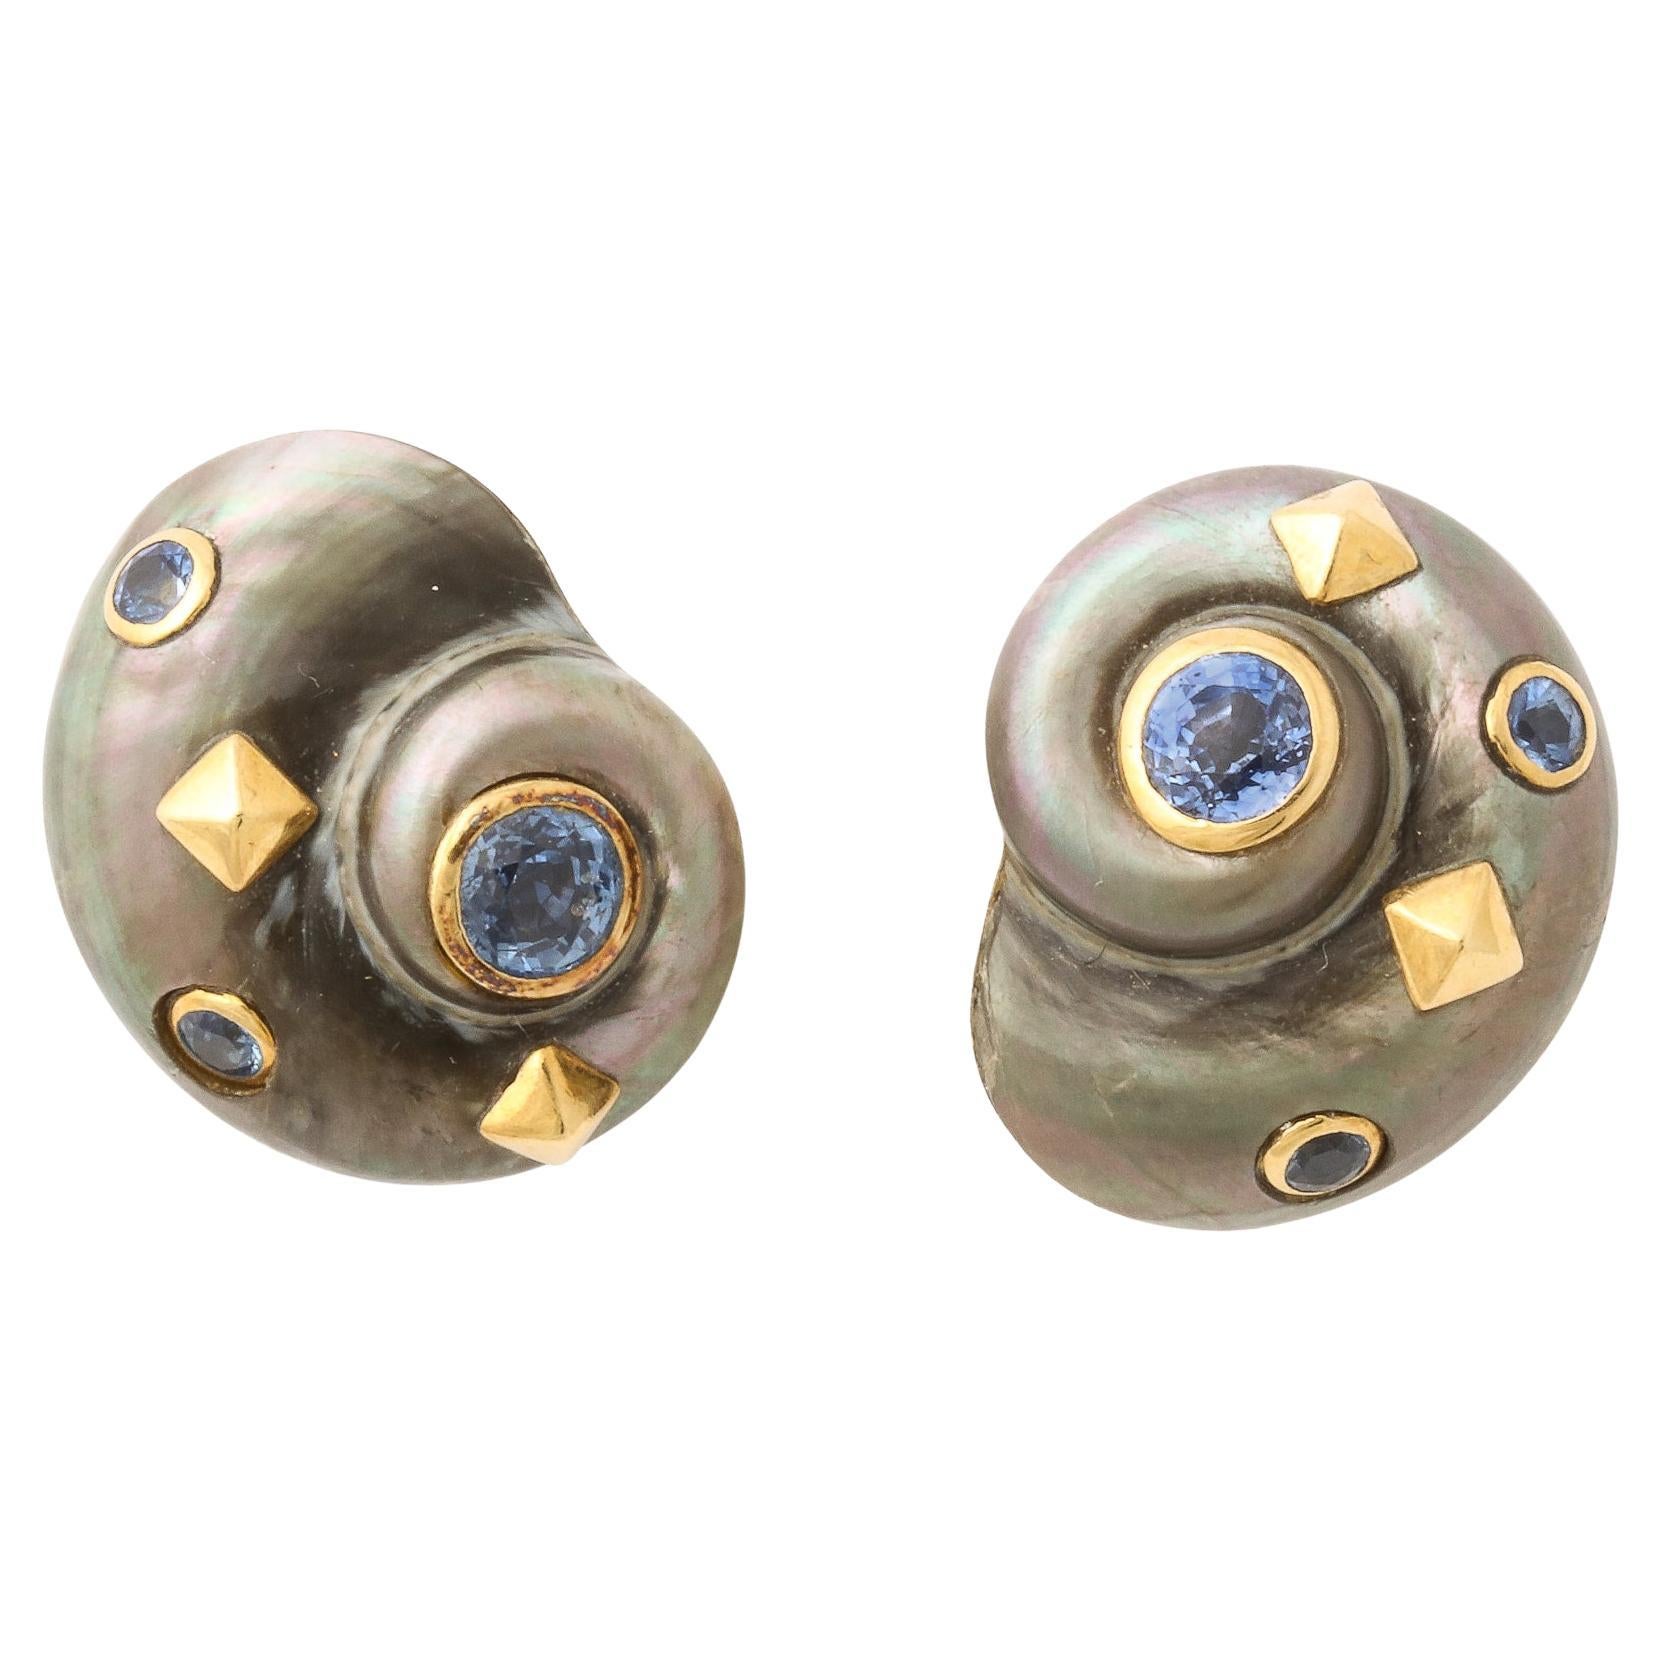 Iridescent Grey Shell Earrings Set in 18k Gold & Inlaid Blue Topaz by Trianon